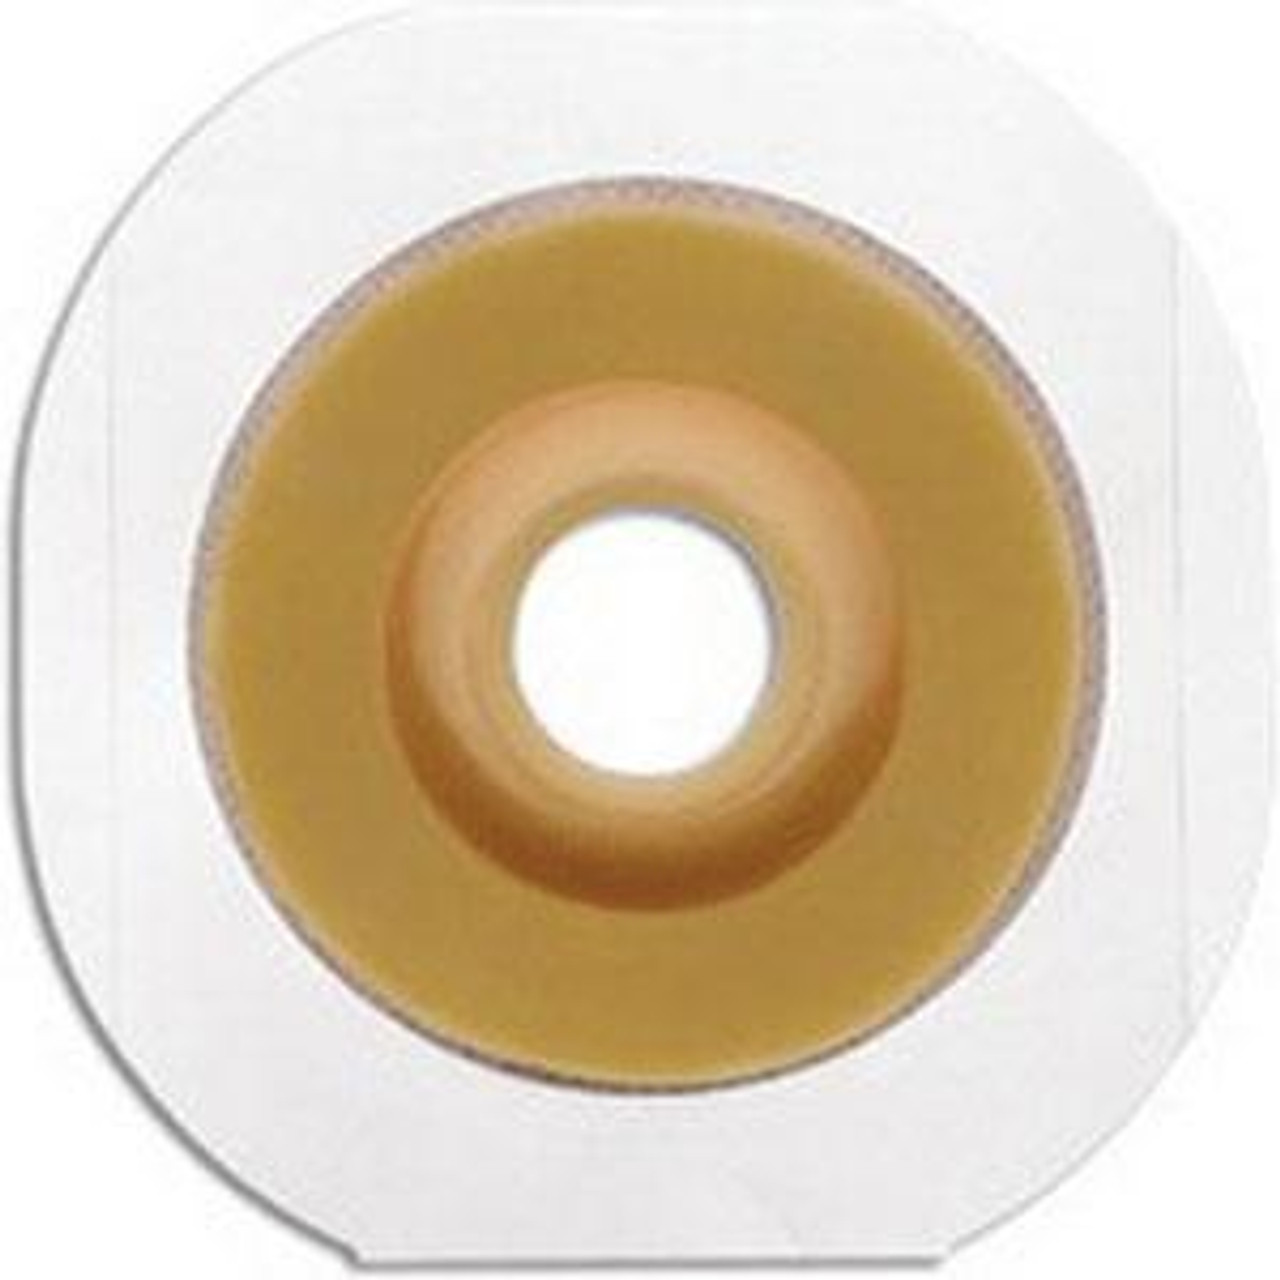 FLEXTEND CONVEX 1 1/4" STOMA,PRE-SIZED NEW IMAGE Barrier BX/5 (HOL-14906) (Hollister 14906)